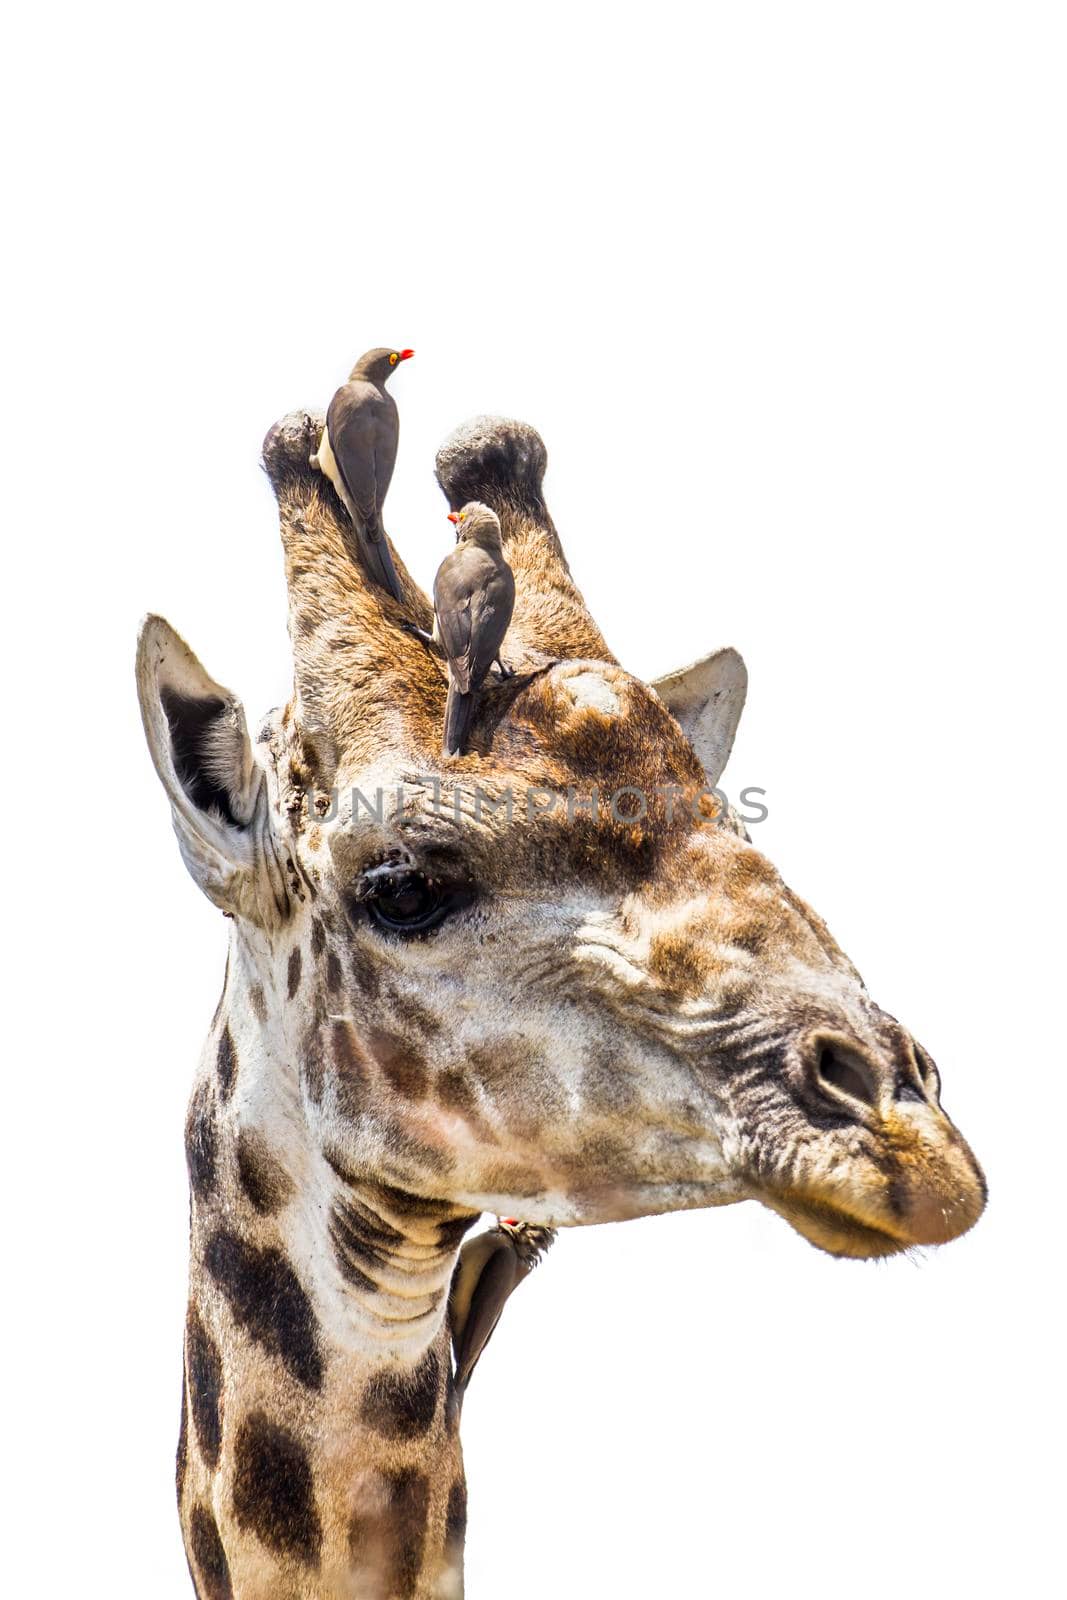 Giraffe portrait isolated in white background by PACOCOMO